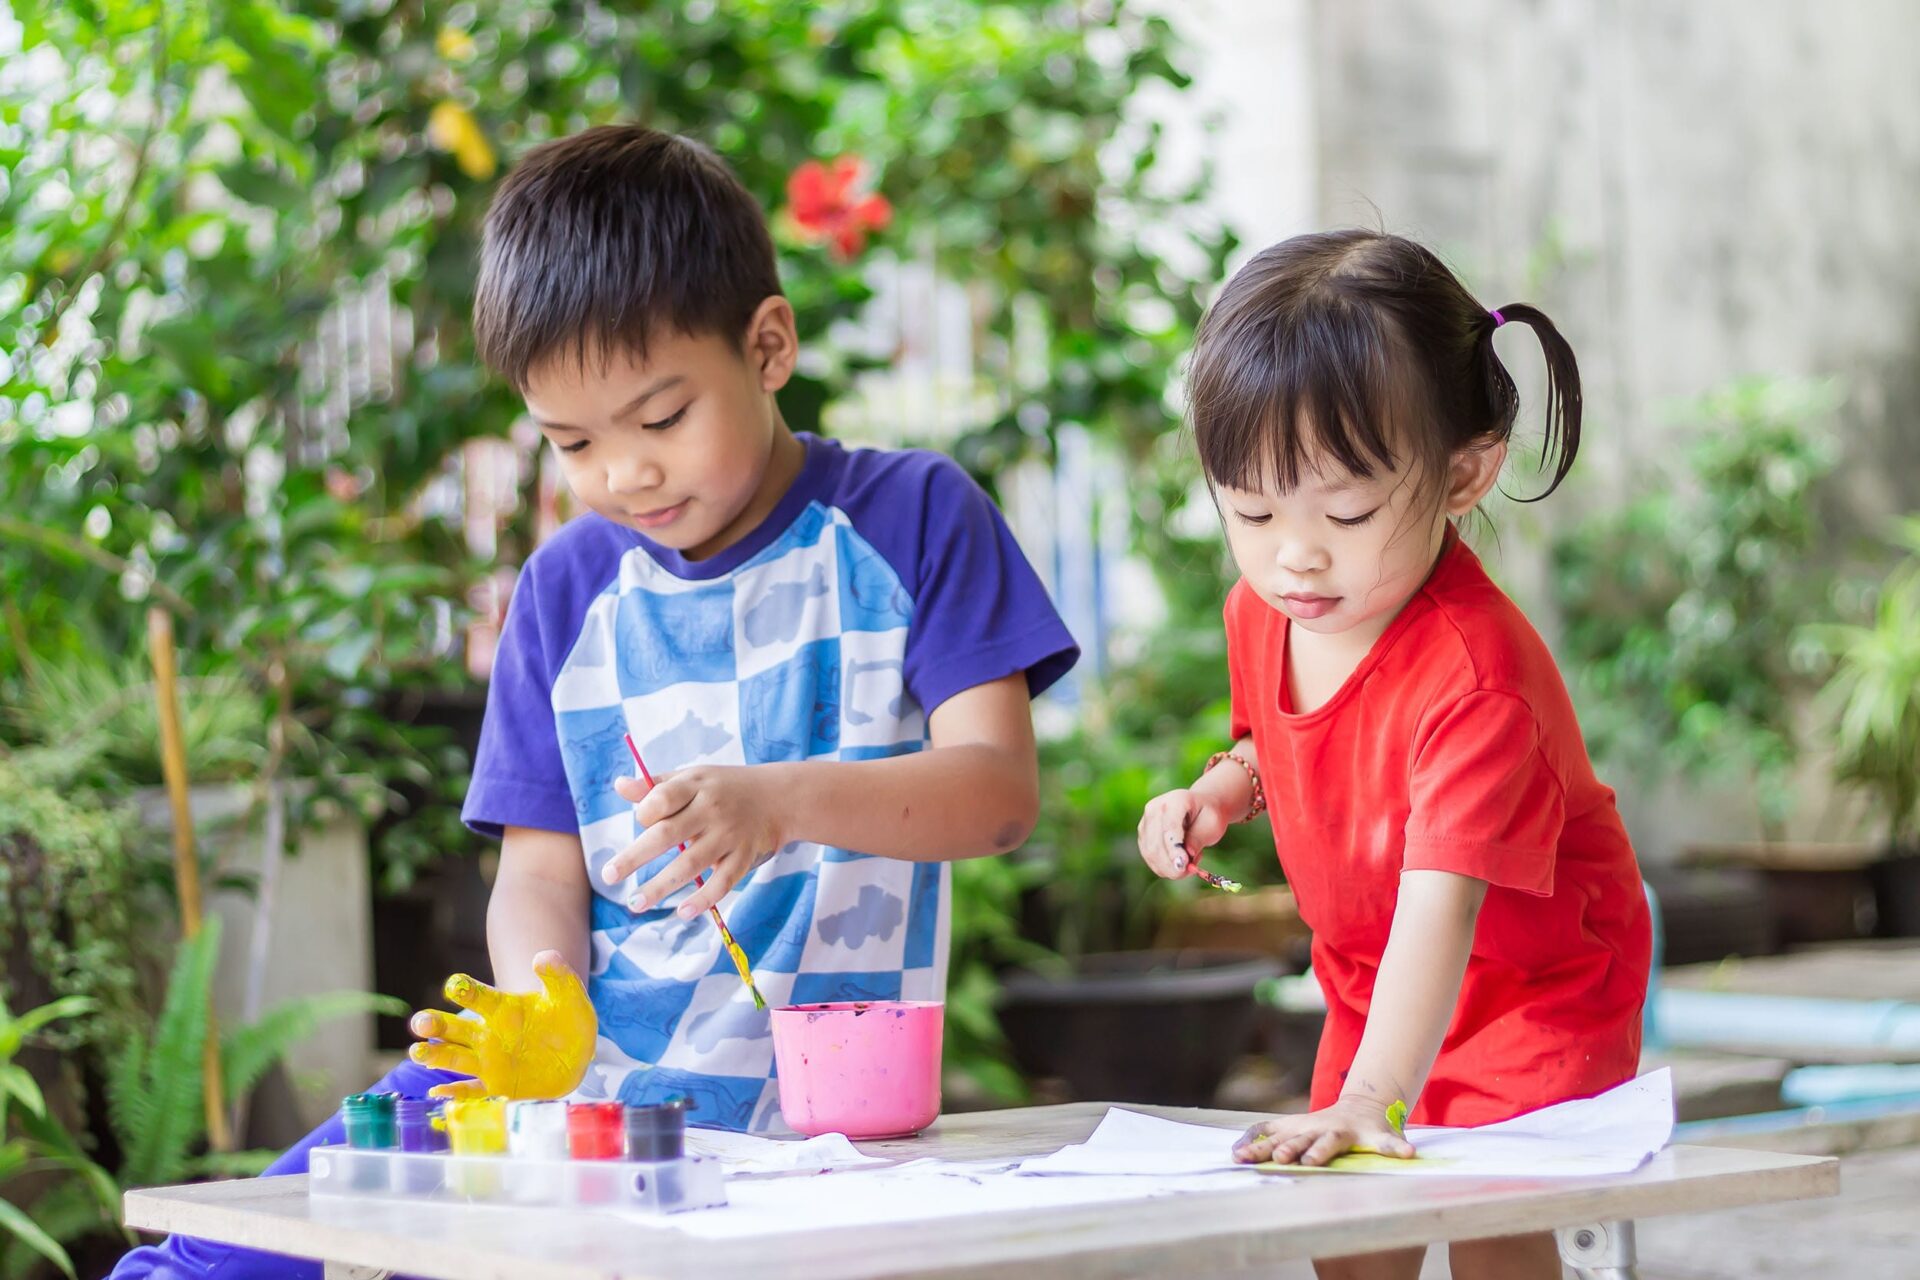 Hands-on activities for young children and their benefits